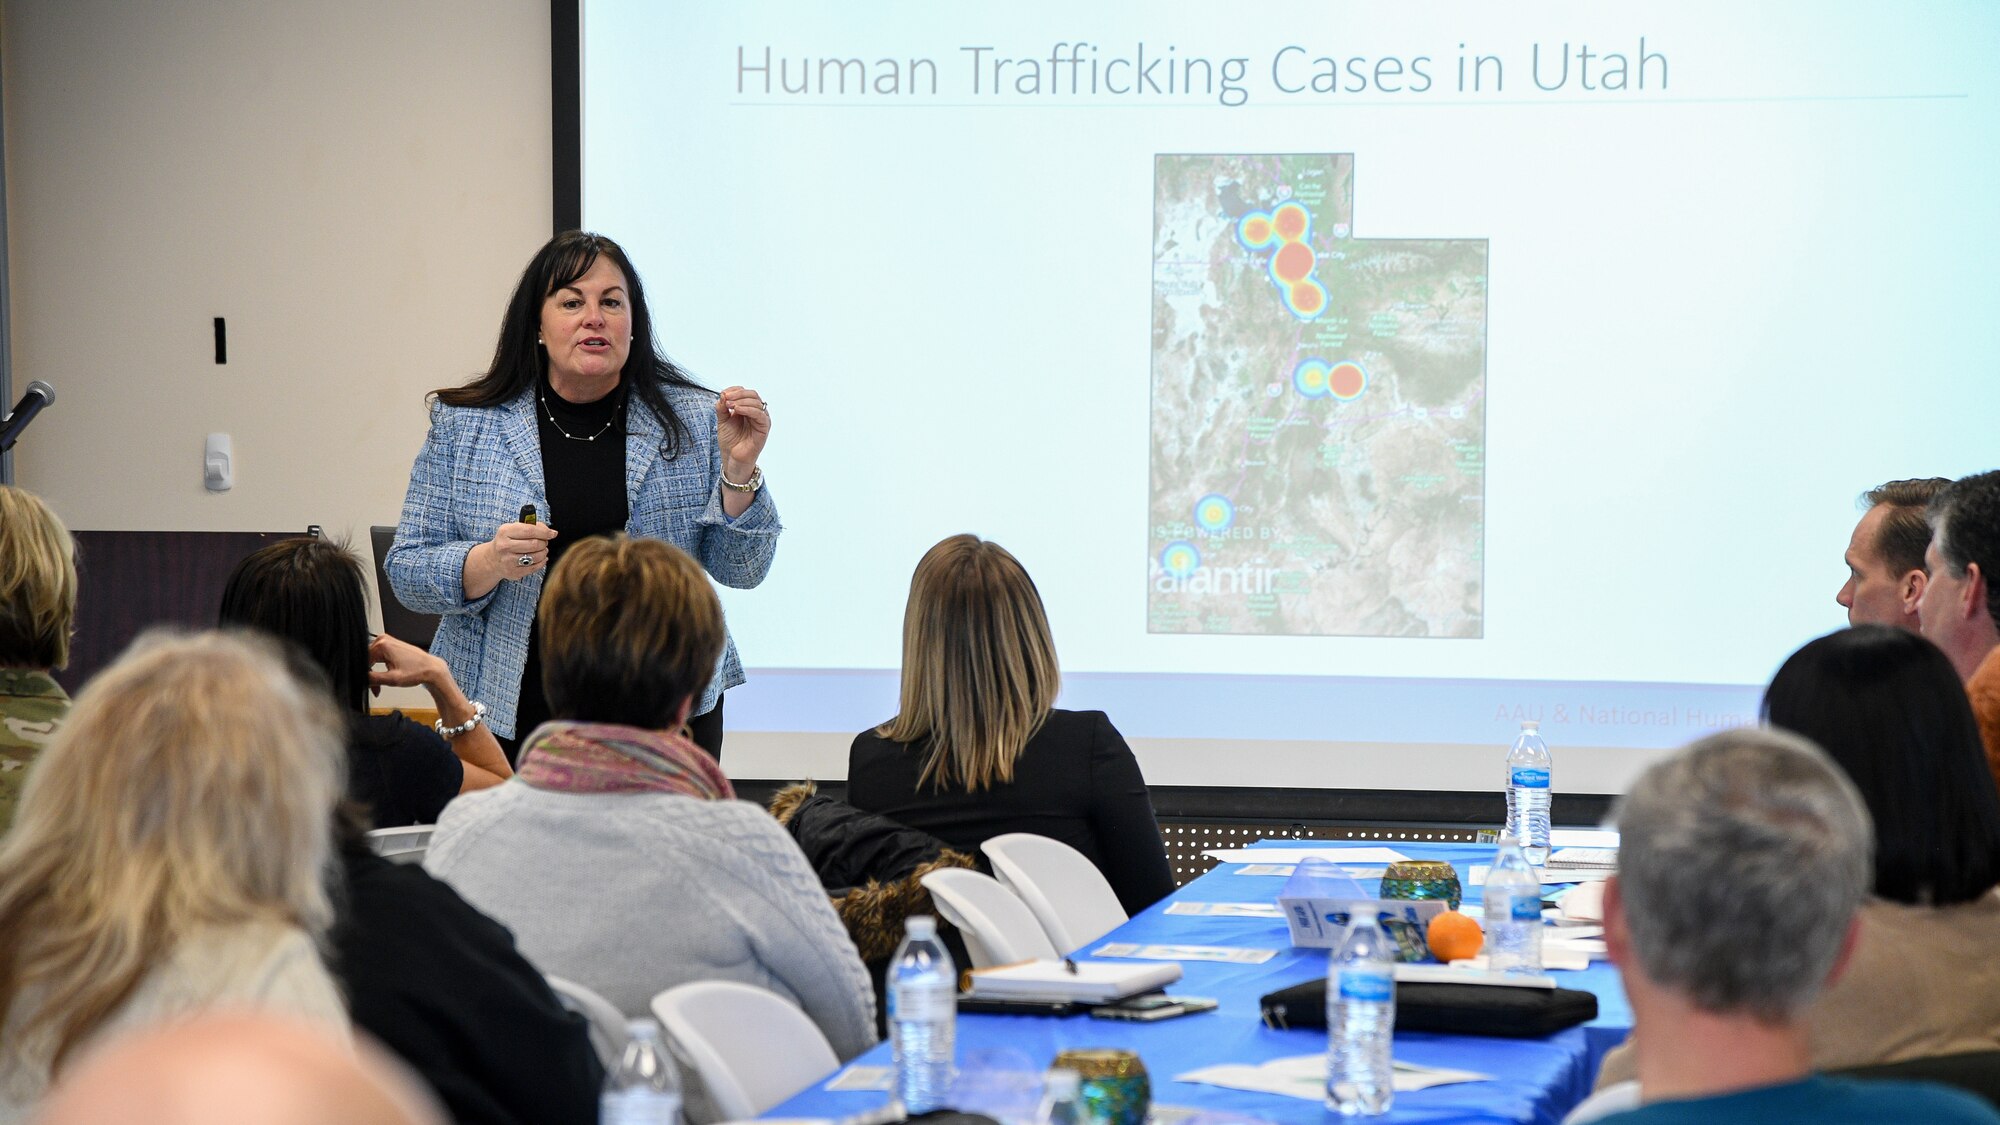 Allison Smith, education and outreach specialist for the Trafficking in Persons Program with the Refugee and Immigrant Center in Salt Lake City, stands in front of a screen depicting human trafficking hot spots across the state of Utah. Audience members look on in the foreground.